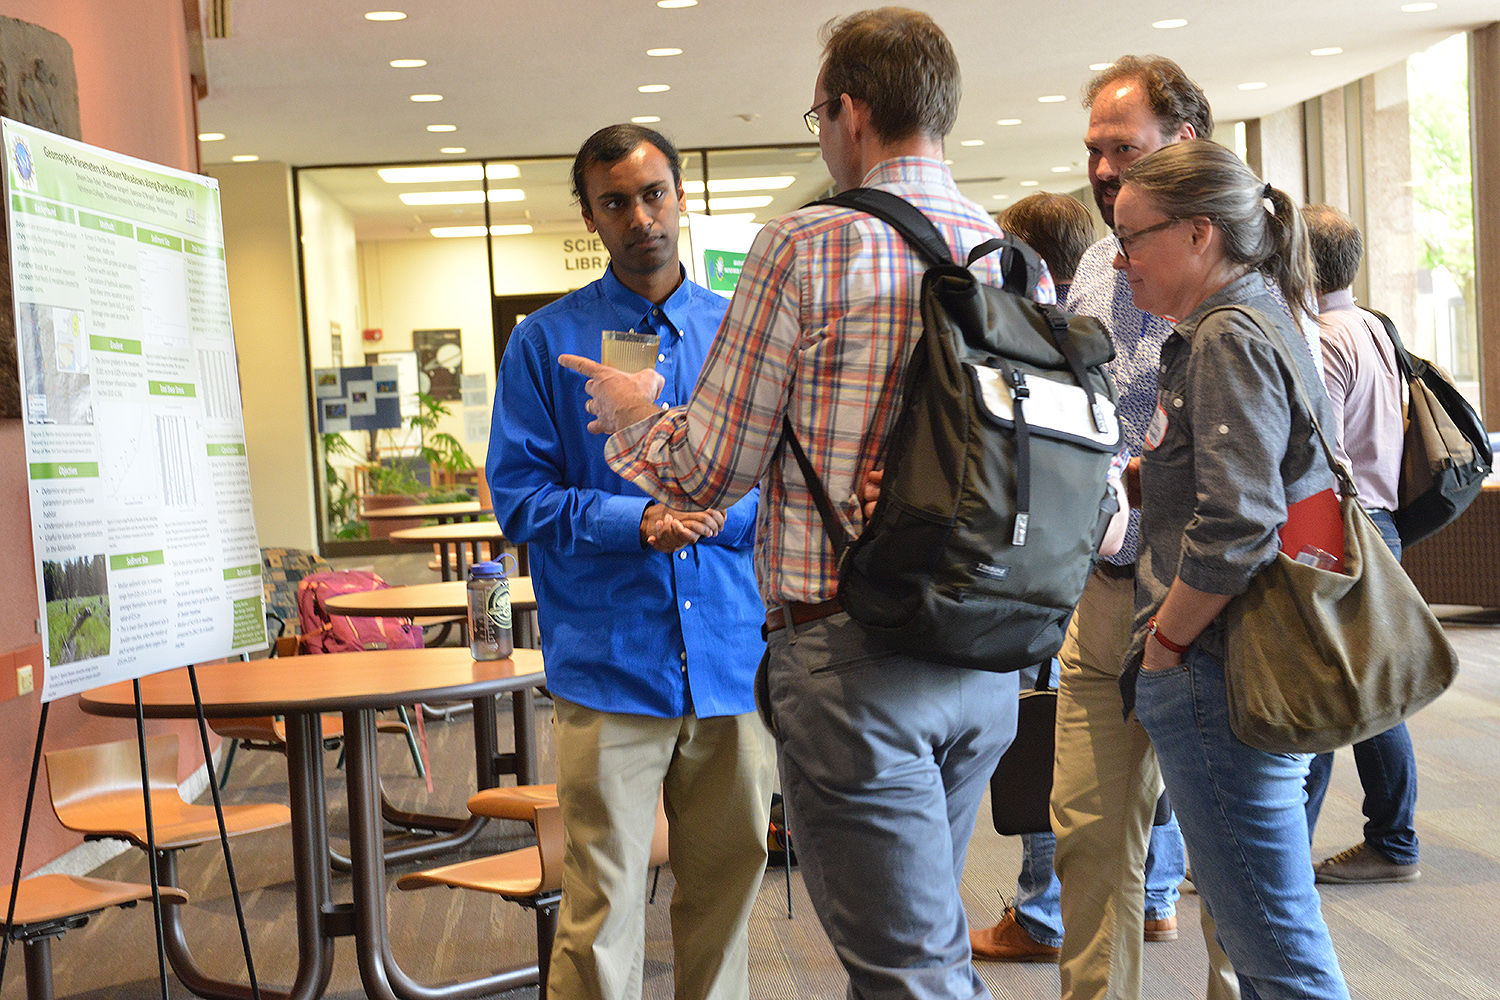 During the 30th Keck Geology Consortium Symposium on April 29, Wesleyan hosted a poster session at Exley Science Center. Several students from the Department of Earth and Environmental Sciences shared their research, as did students visiting from other universities who are part of the Keck Geology Consortium. 